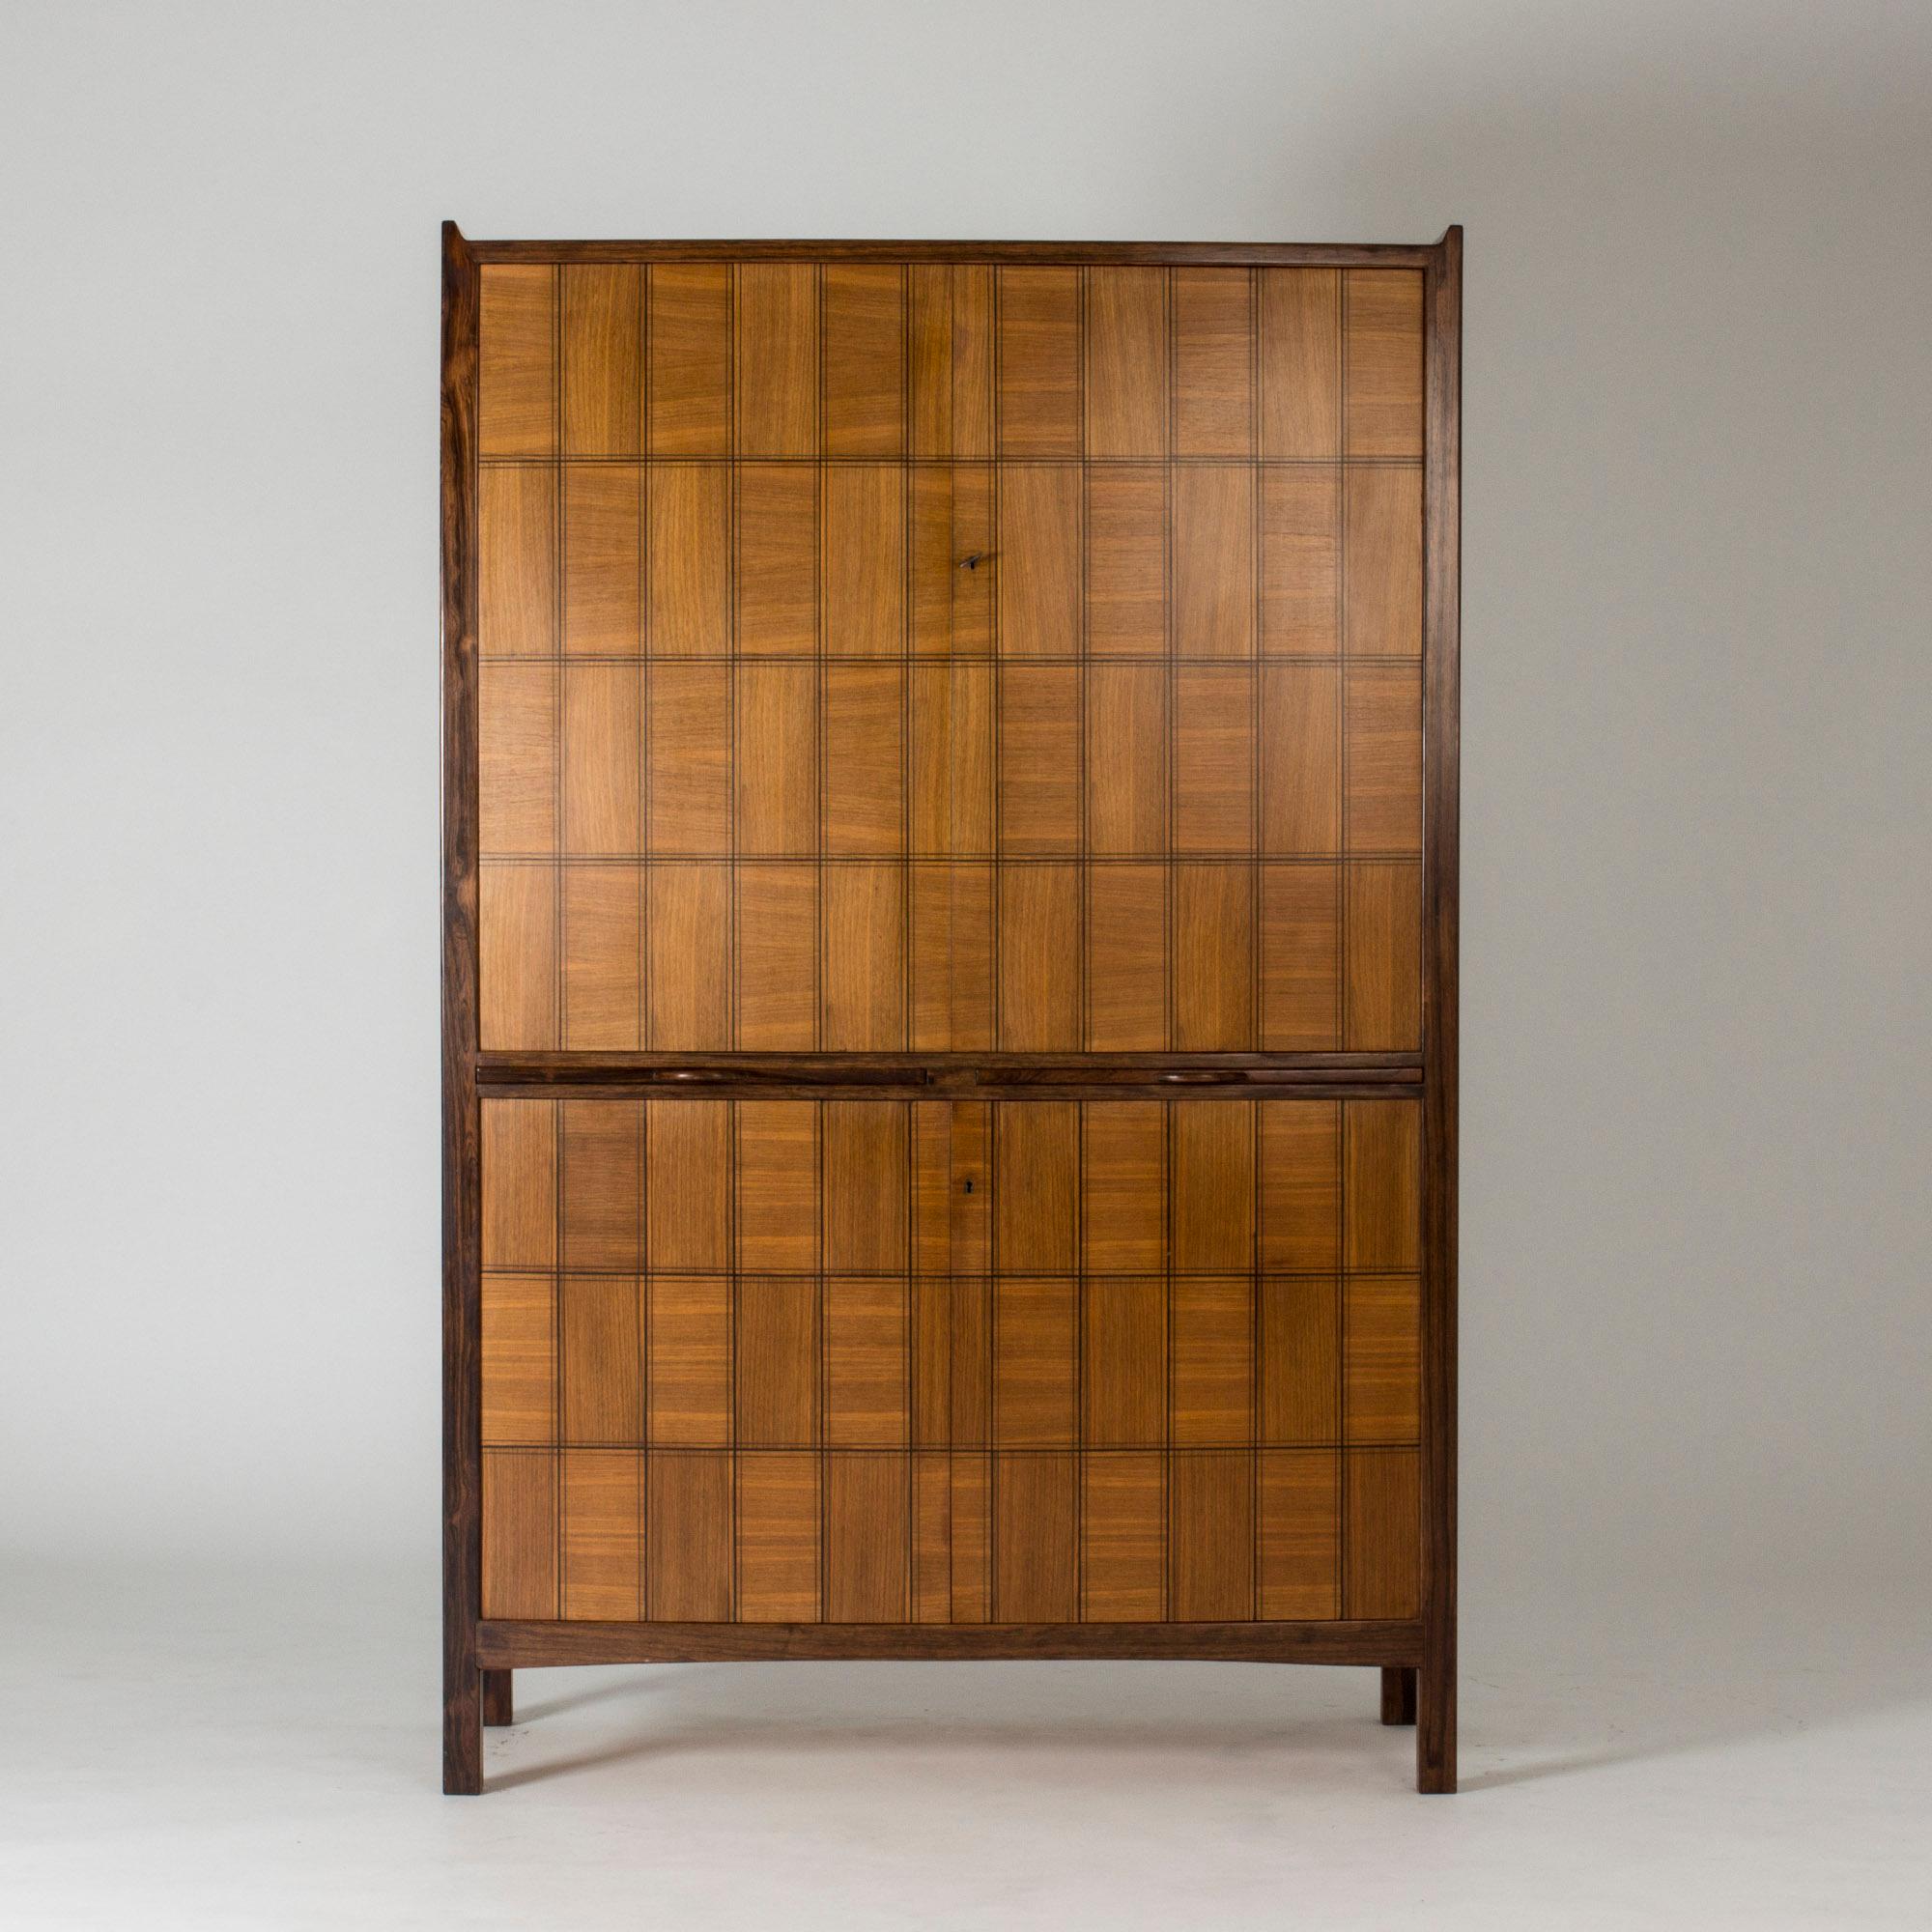 Stunning mahogany and rosewood cabinet designed by David Rosén and made by master carpenter Thomas Lindell as his apprentice’s examination work. The cabinet took a year to finish, with its elaborate checkered inlays and sculpted details the top and